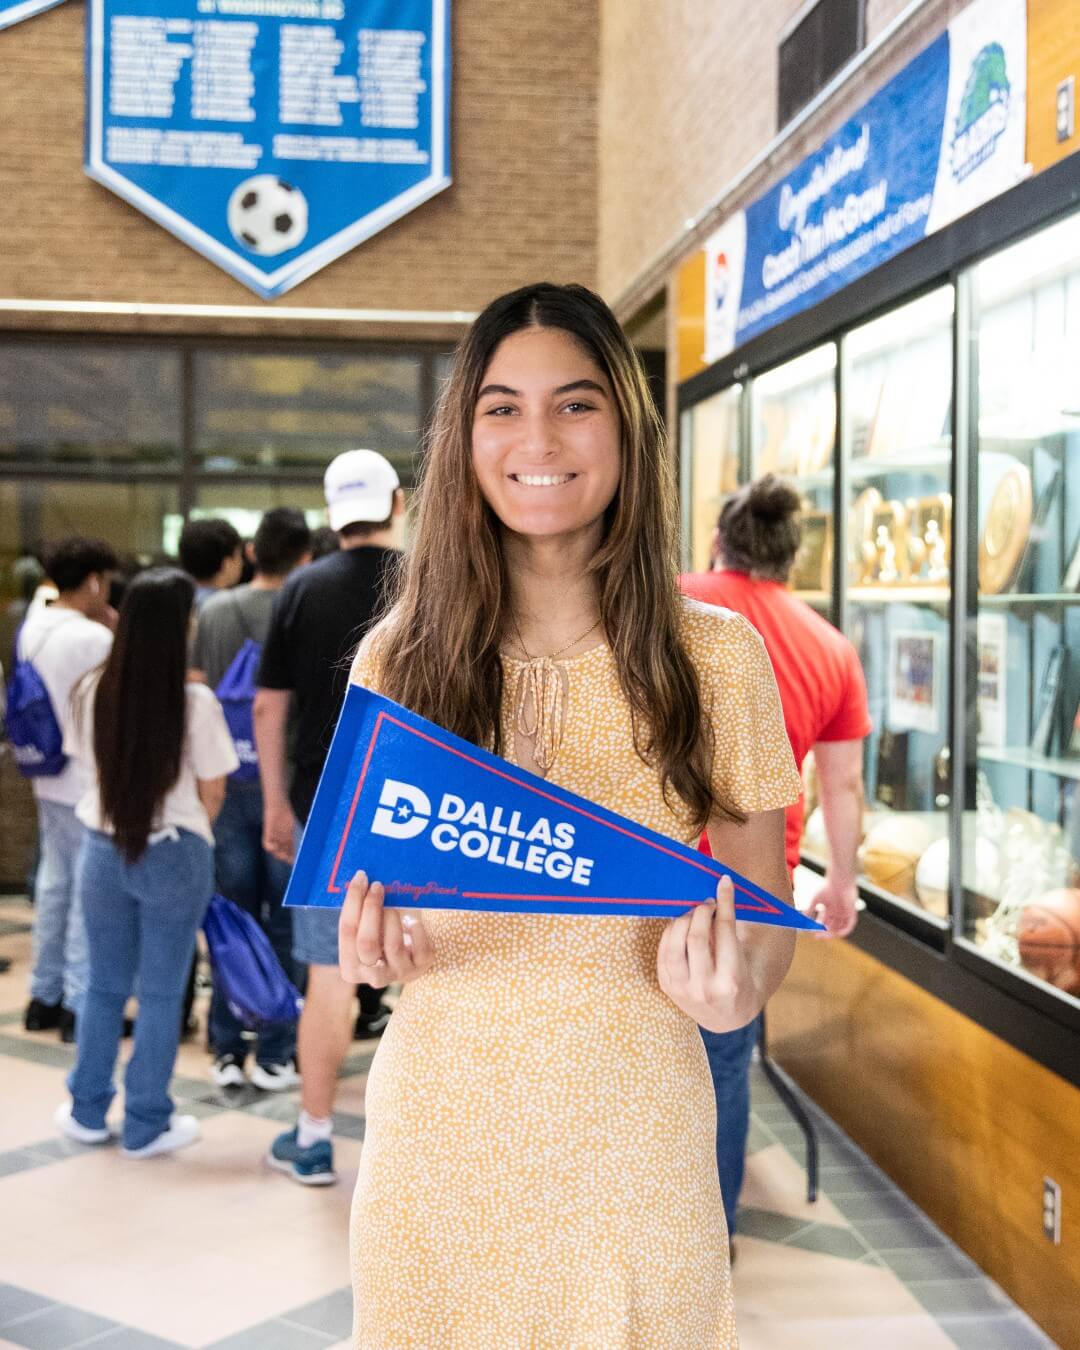 A girl proudly holds a blue and white pennant with Dallas College logo.